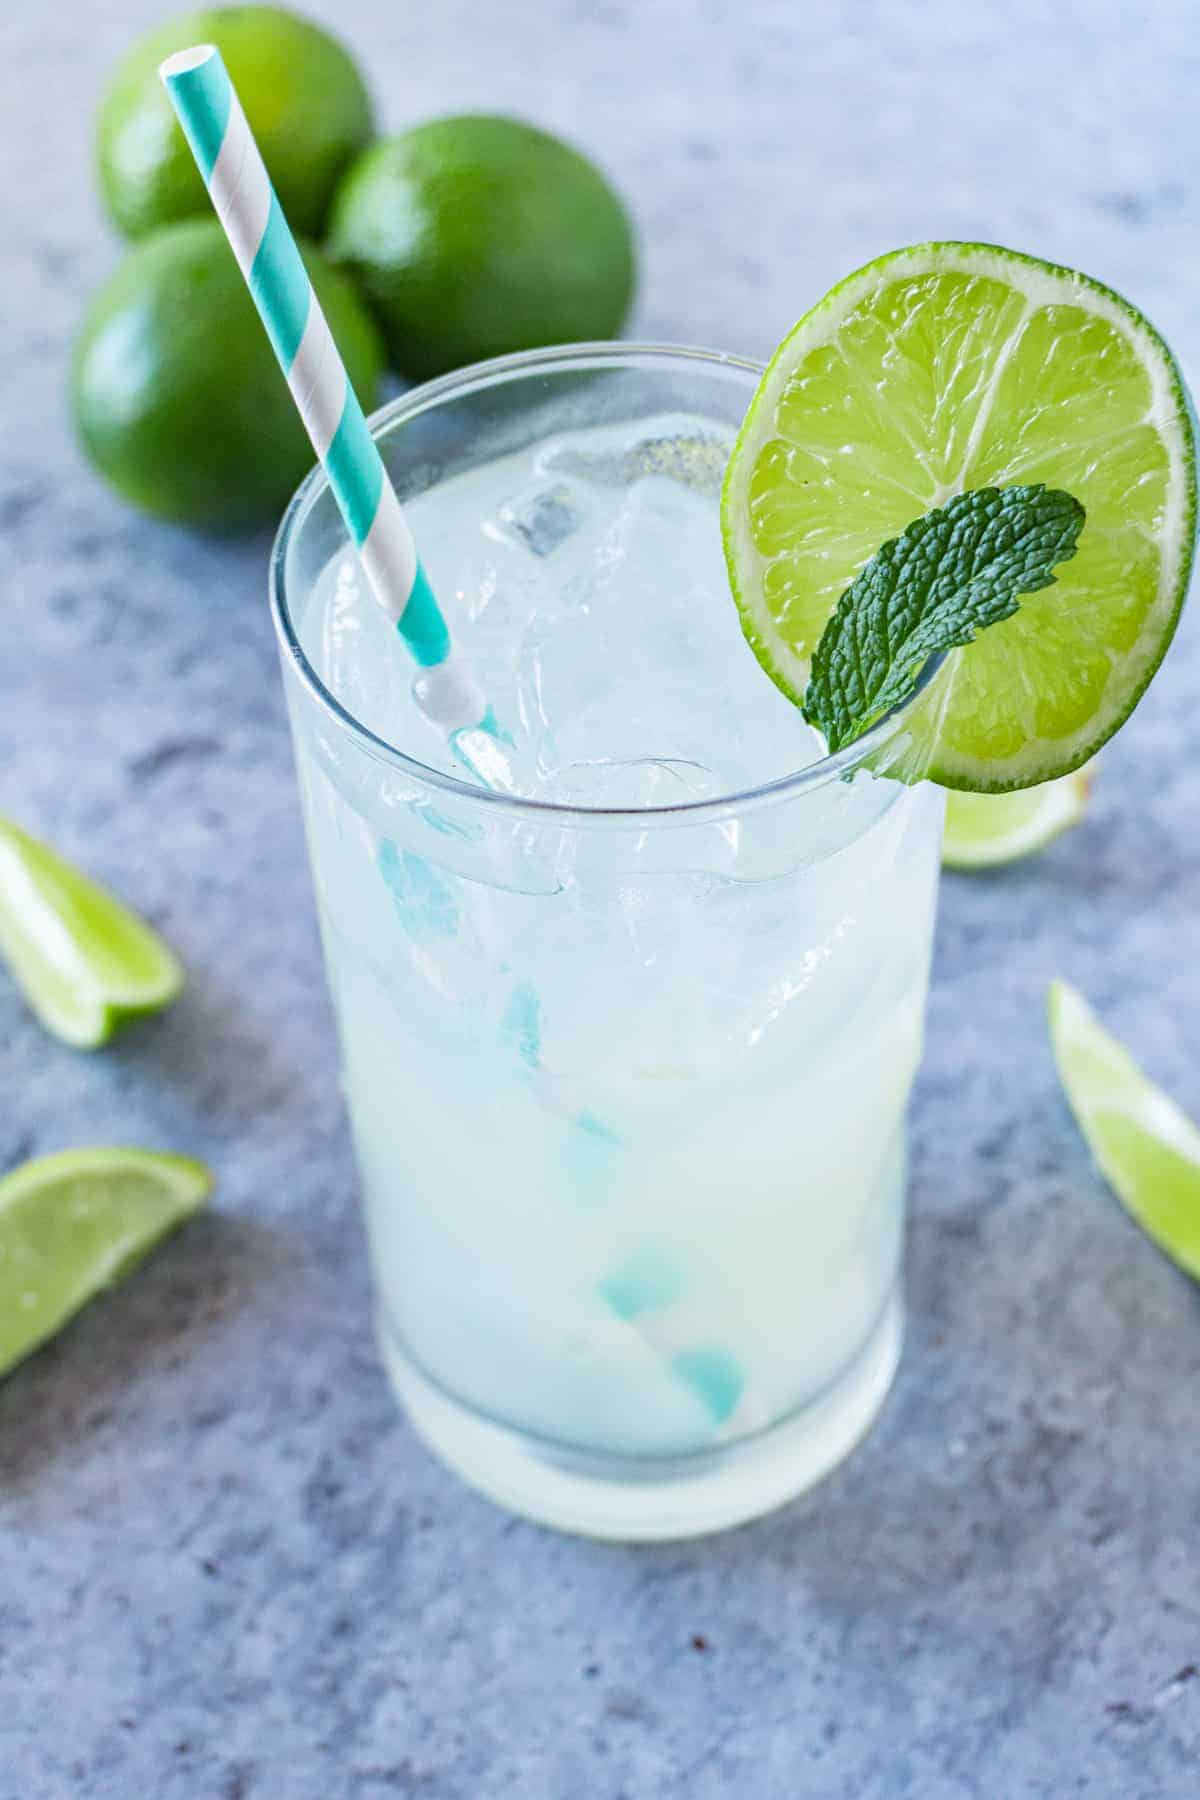 Glass of limeade with lime wedge and straw